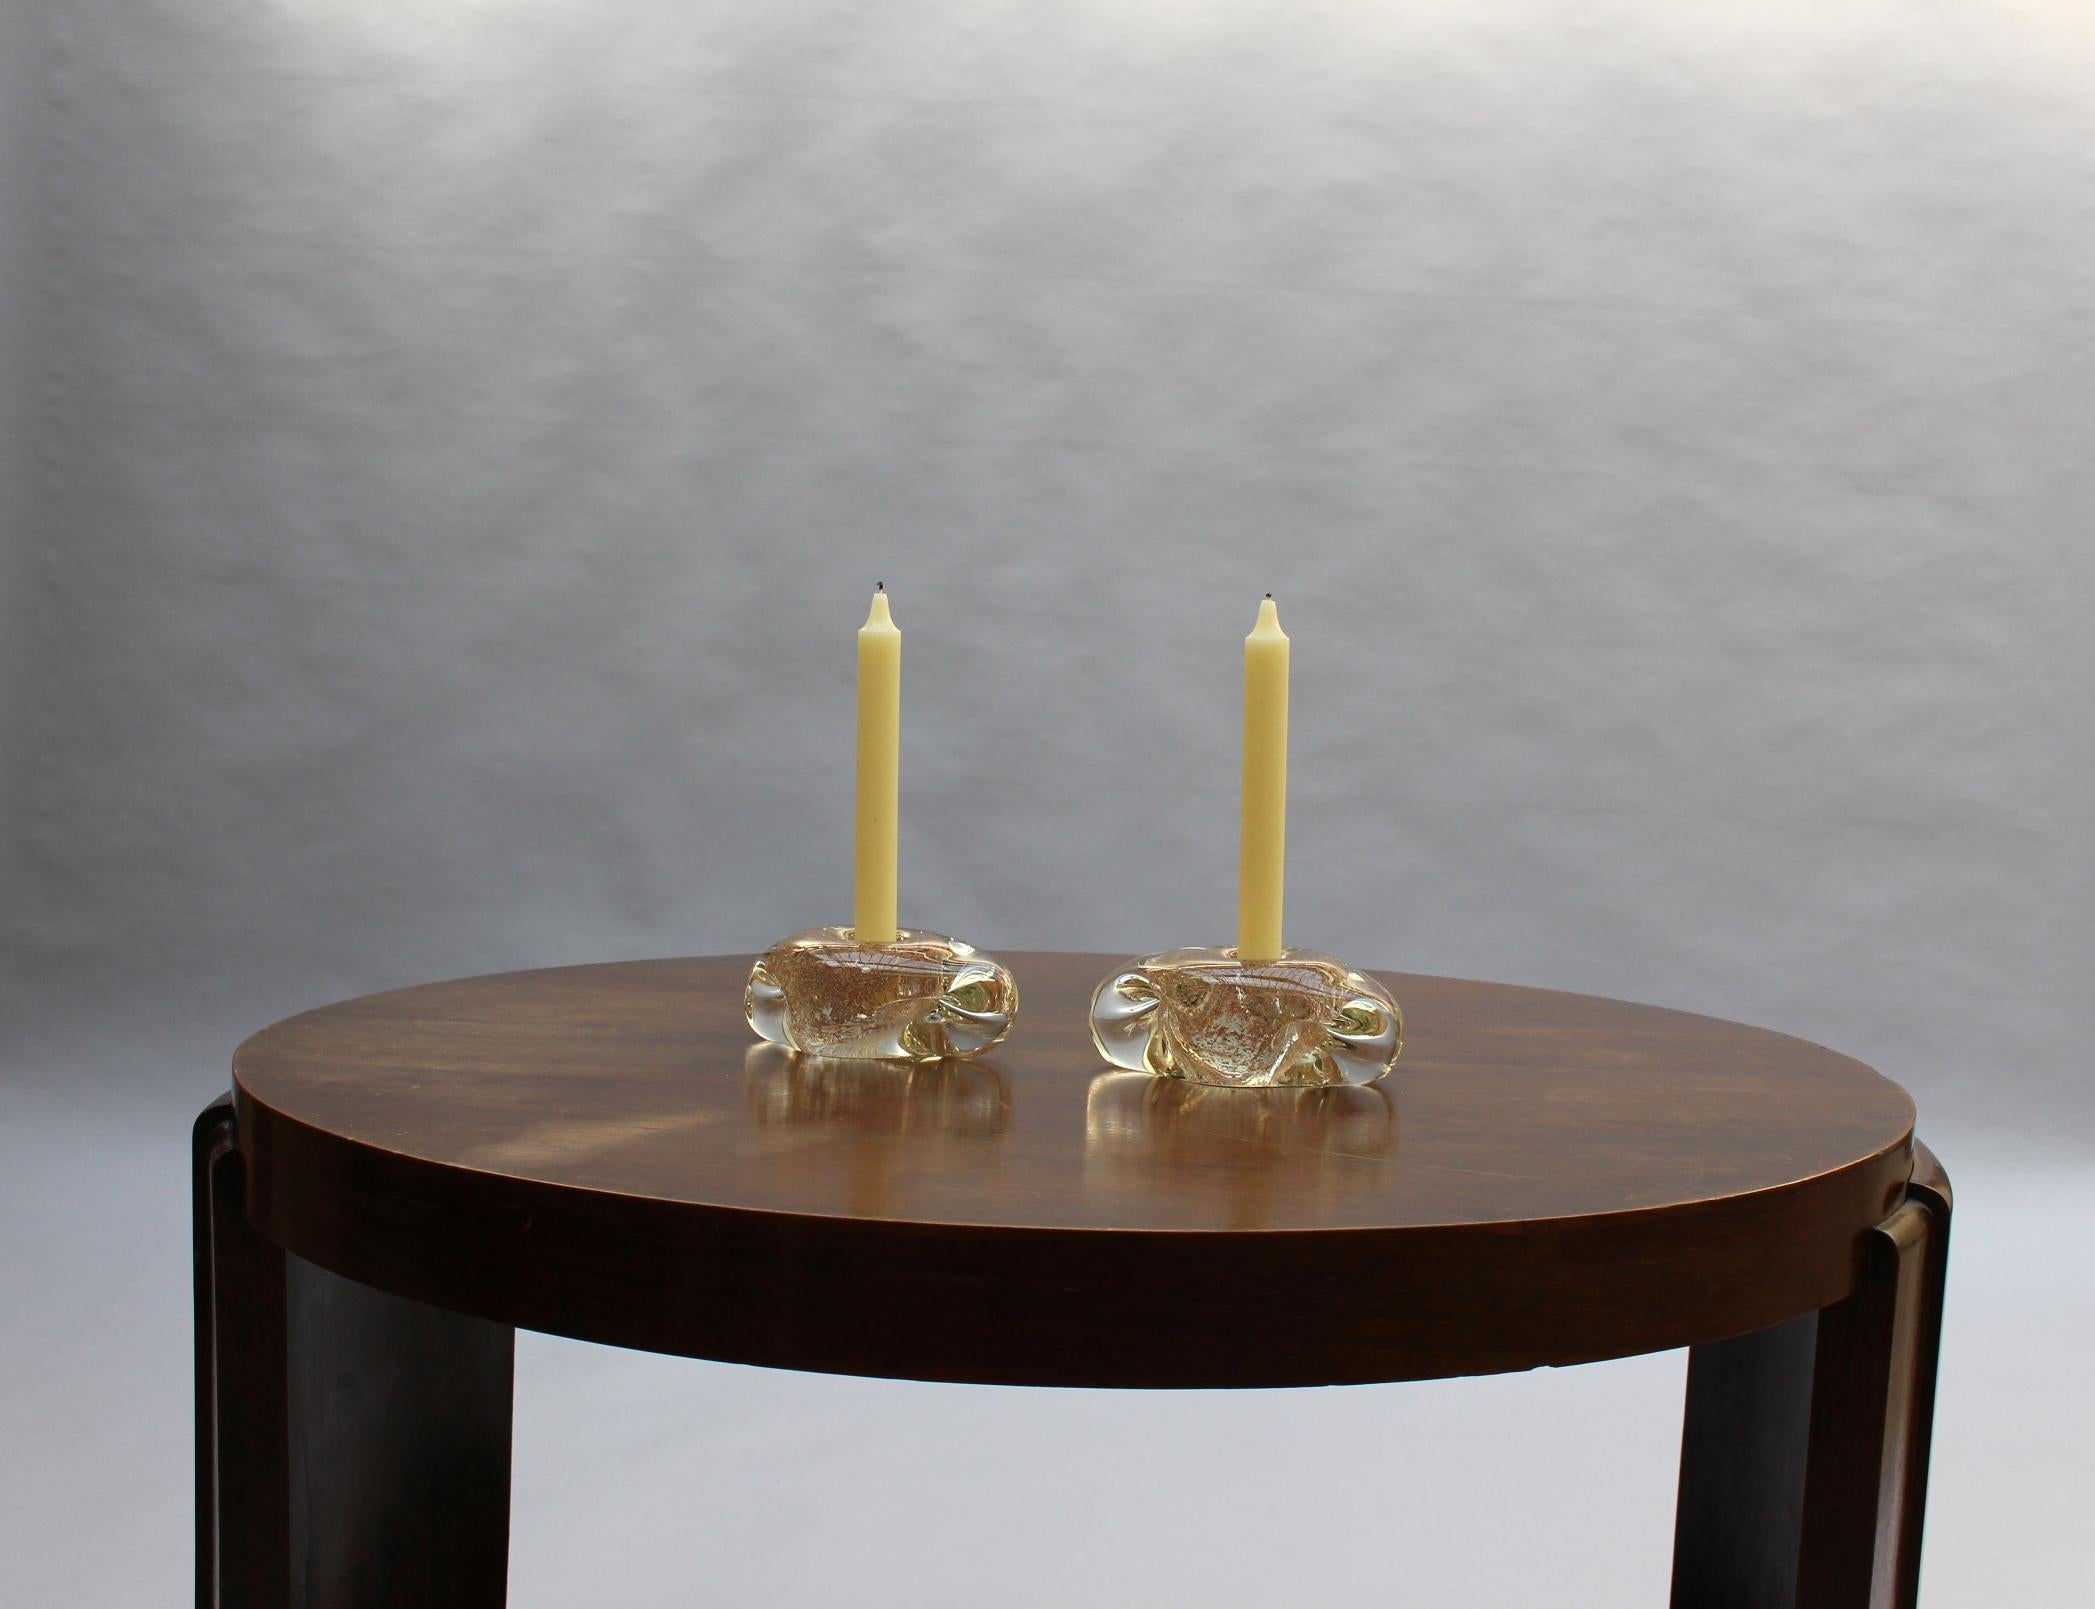 André THURET (1898-1965) - A pair of fine clear glass candlesticks with inclusions of metal oxides

Signed on bottom with diamond point: Andre Thuret

Dimensions listed are the larger of the two.